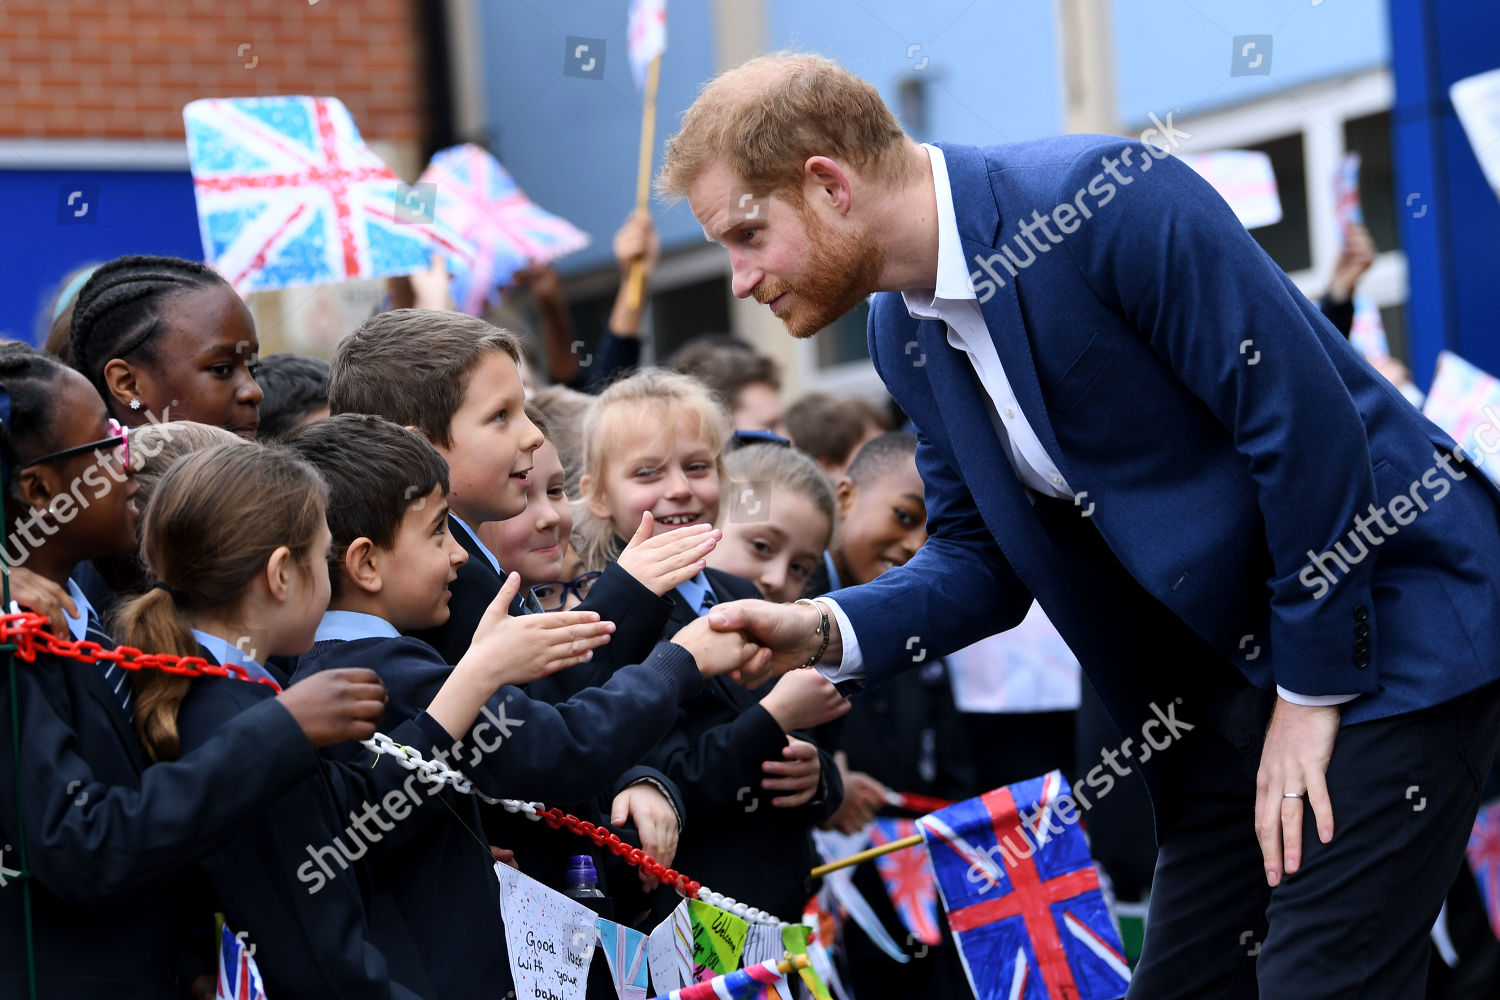 prince-harry-visits-st-vincents-catholic-primary-school-for-commonwealth-canopy-and-woodland-trust-tree-planting-ceremony-london-uk-shutterstock-editorial-10160984ac.jpg